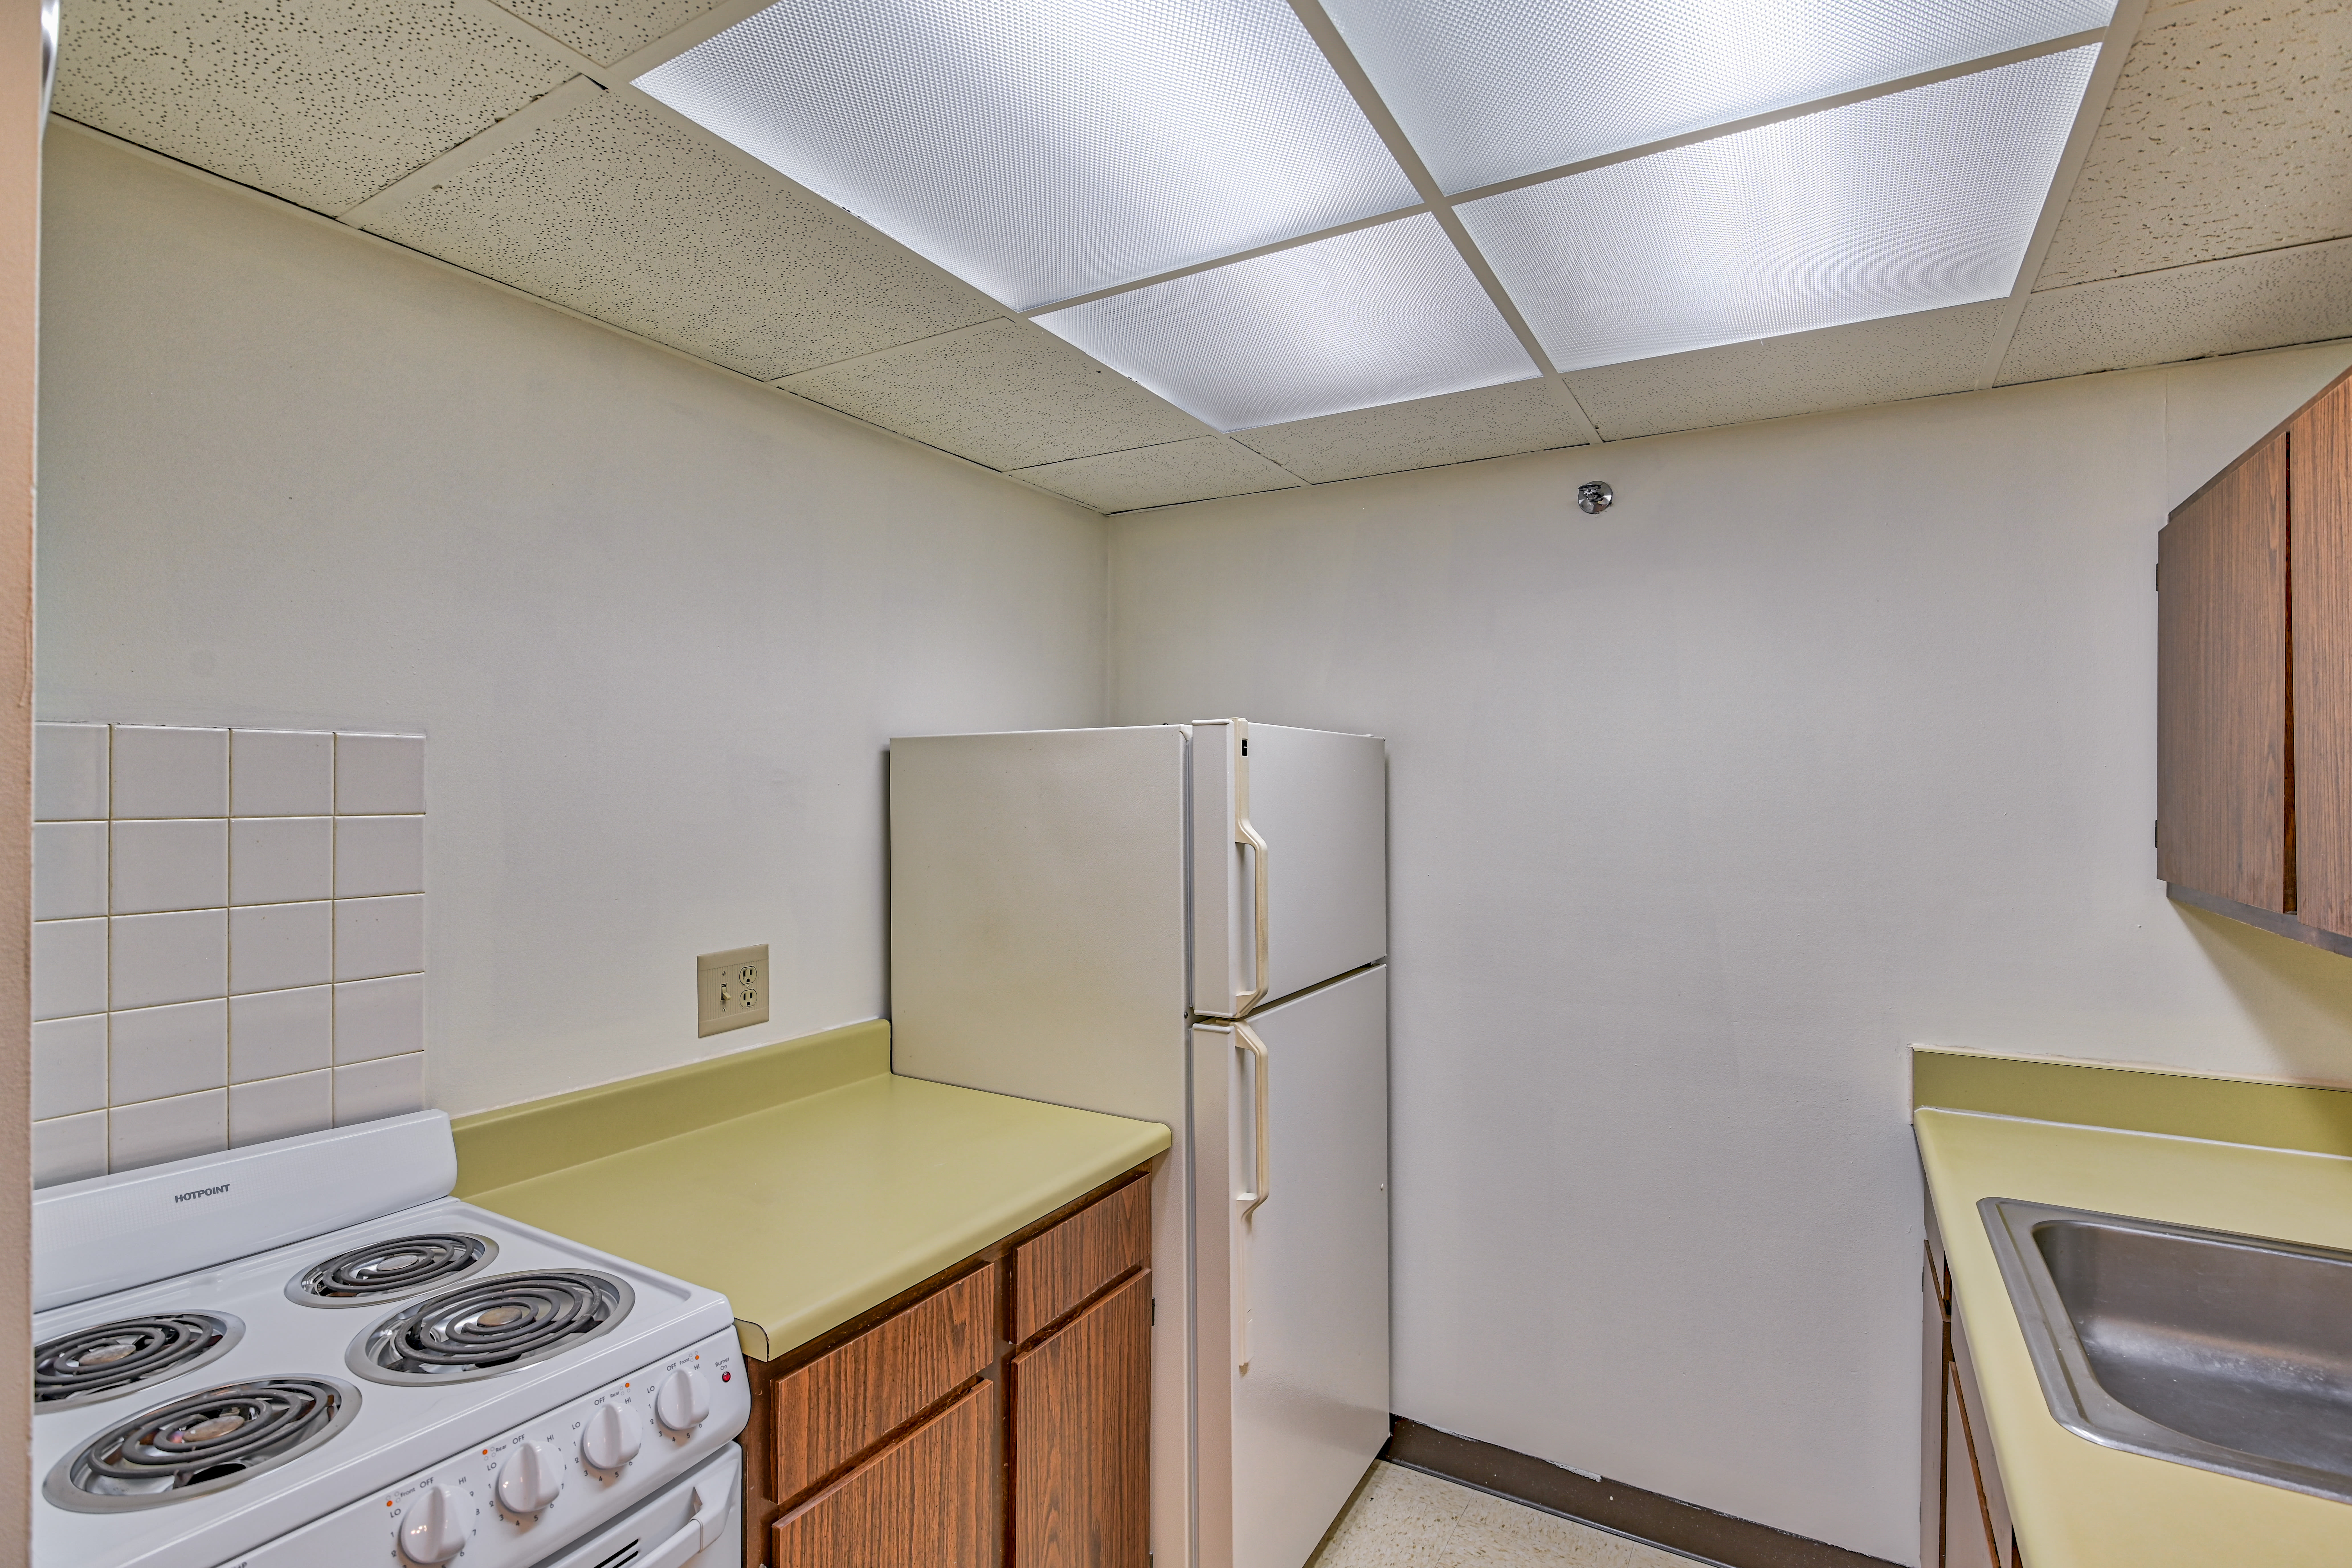 Model kitchen with a 4 top burner at Riverside Towers in Coshocton, Ohio